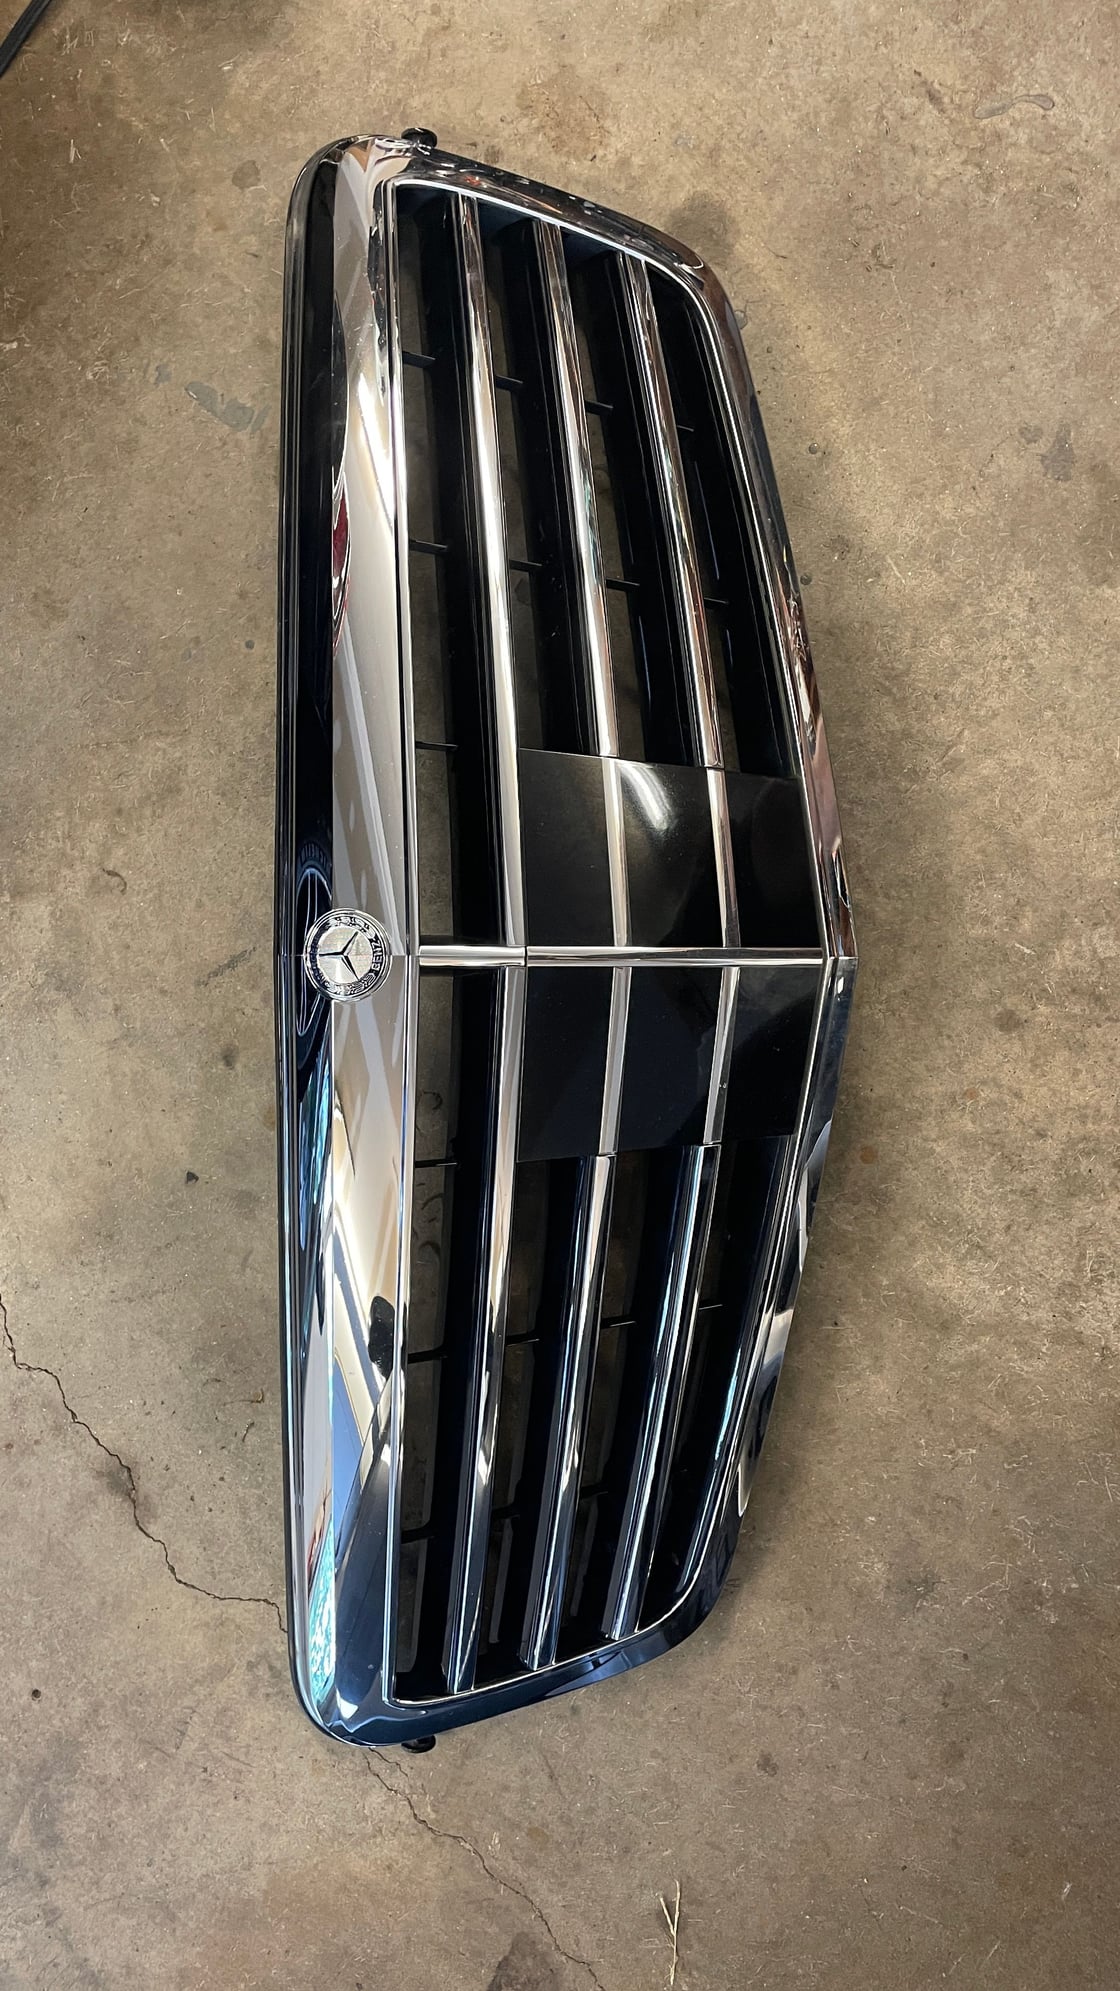 Exterior Body Parts - w212 (2010-2011) E63 Grill w/ Distronic - Used - 2010 to 2011 Mercedes-Benz E63 AMG - Asheville, NC 28804, United States